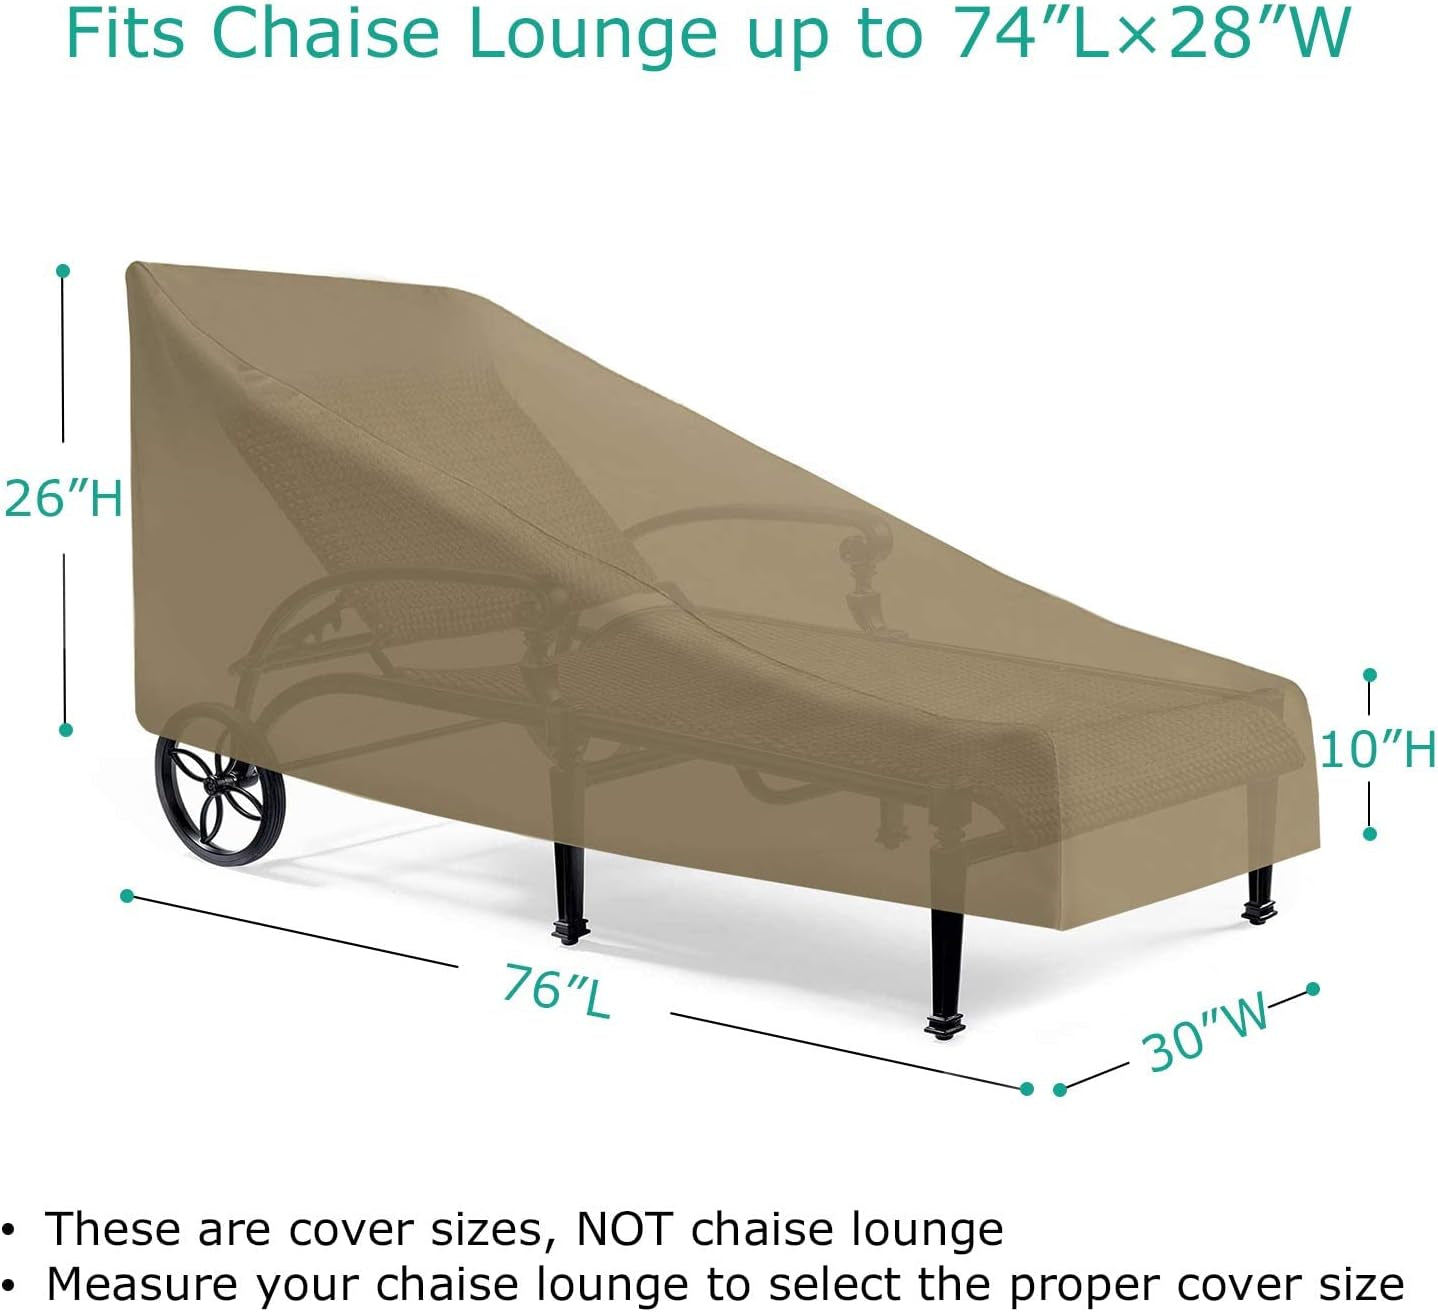 "Waterproof 76" Outdoor Chaise Lounge Cover: Heavy Duty, All-Weather Protection (Taupe)"